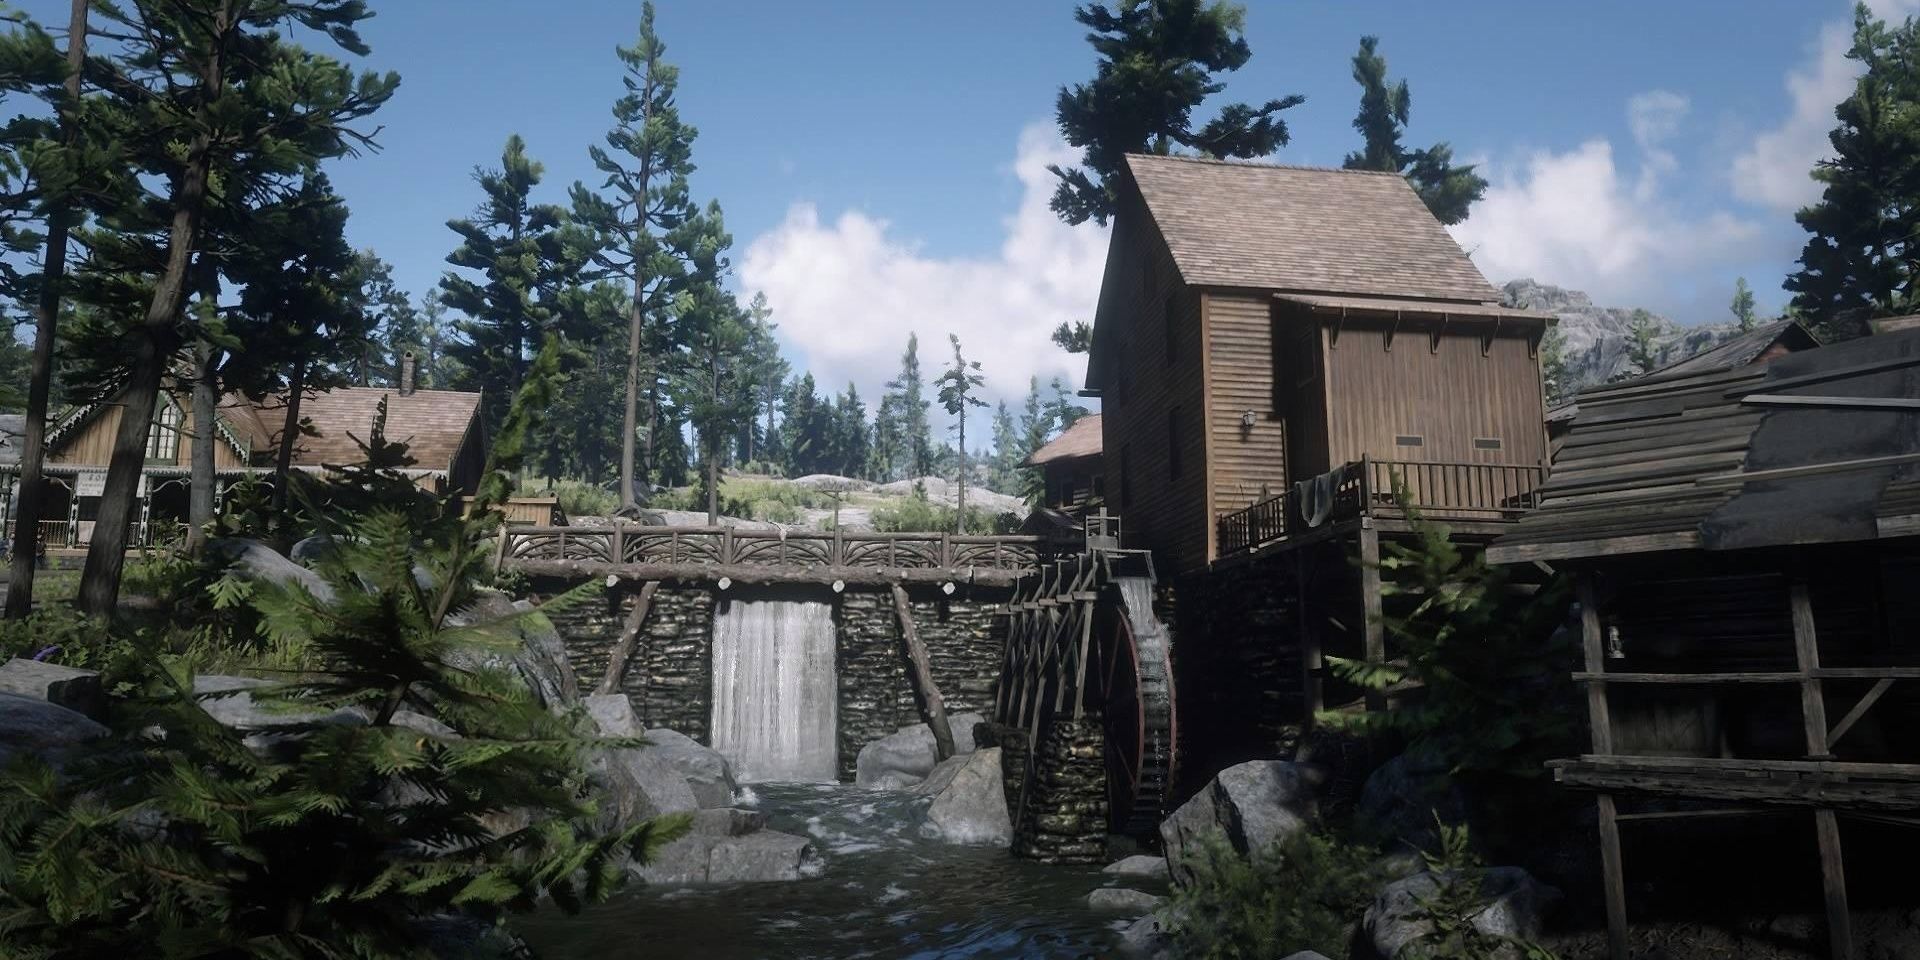 The 10 Best Areas Of Red Dead Redemption 2 Ranked